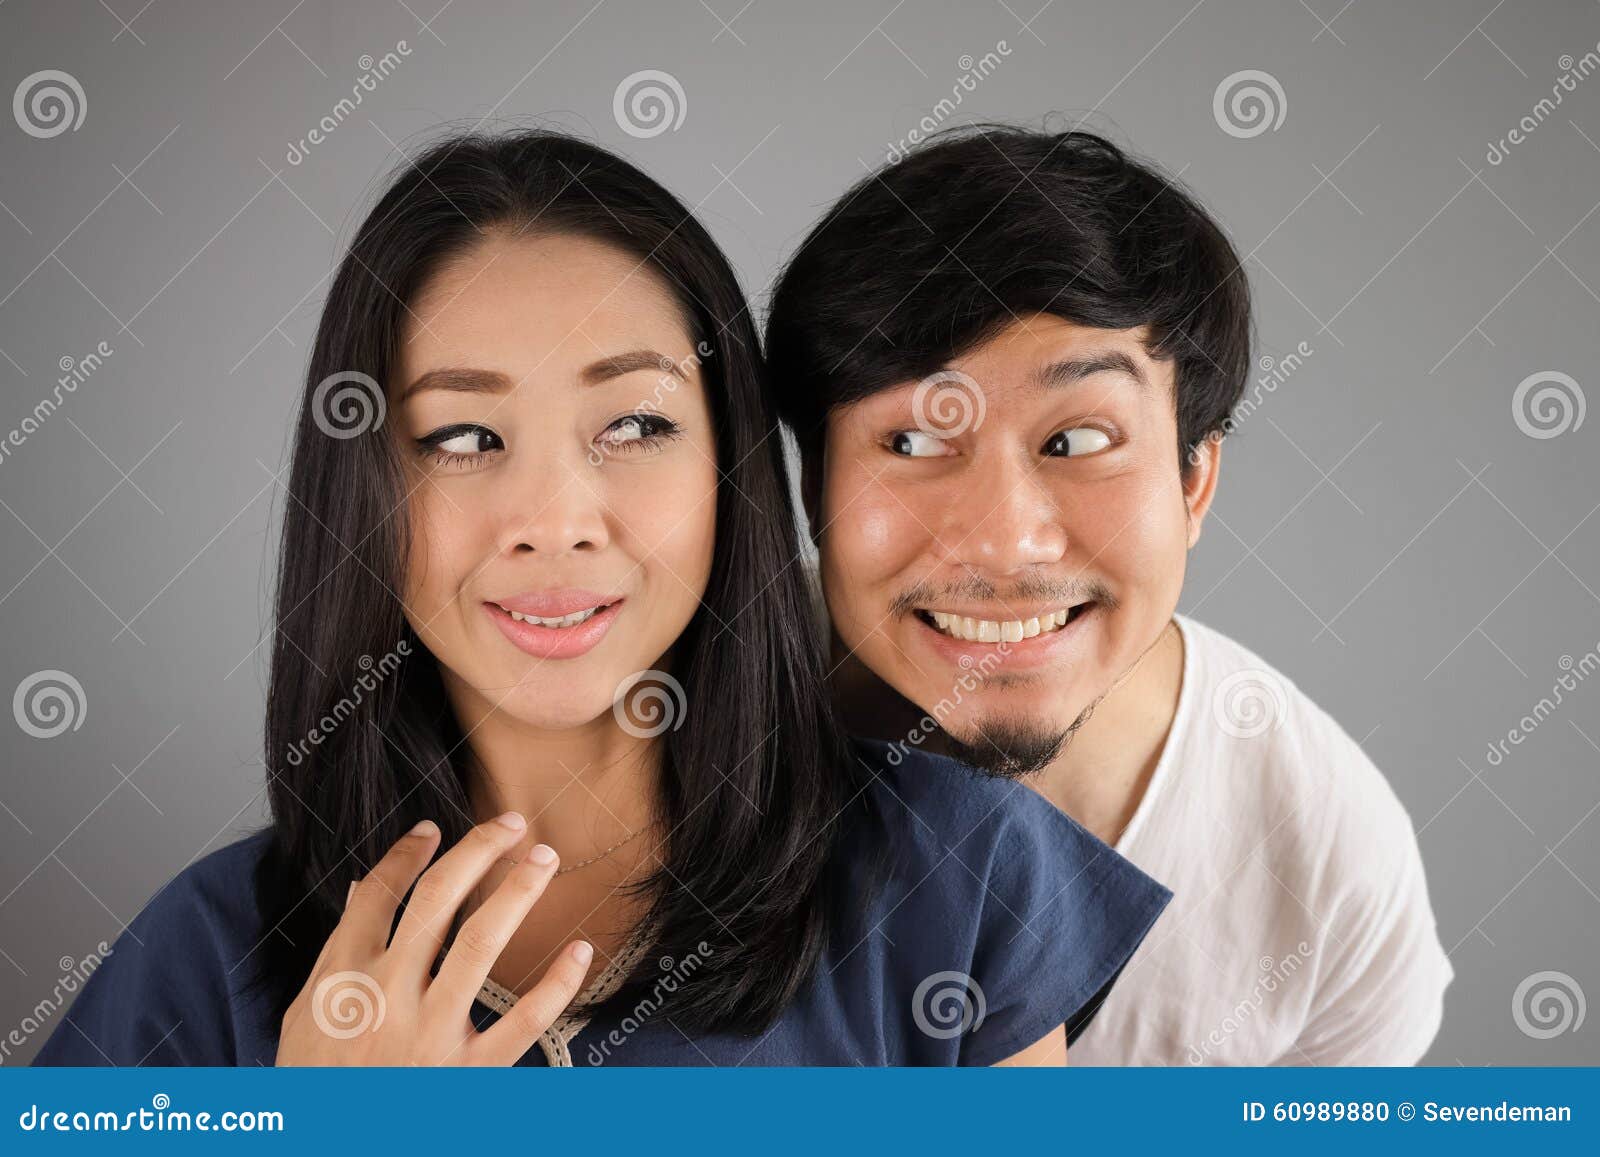 https://thumbs.dreamstime.com/z/lovely-asian-couple-smiling-to-each-other-60989880.jpg